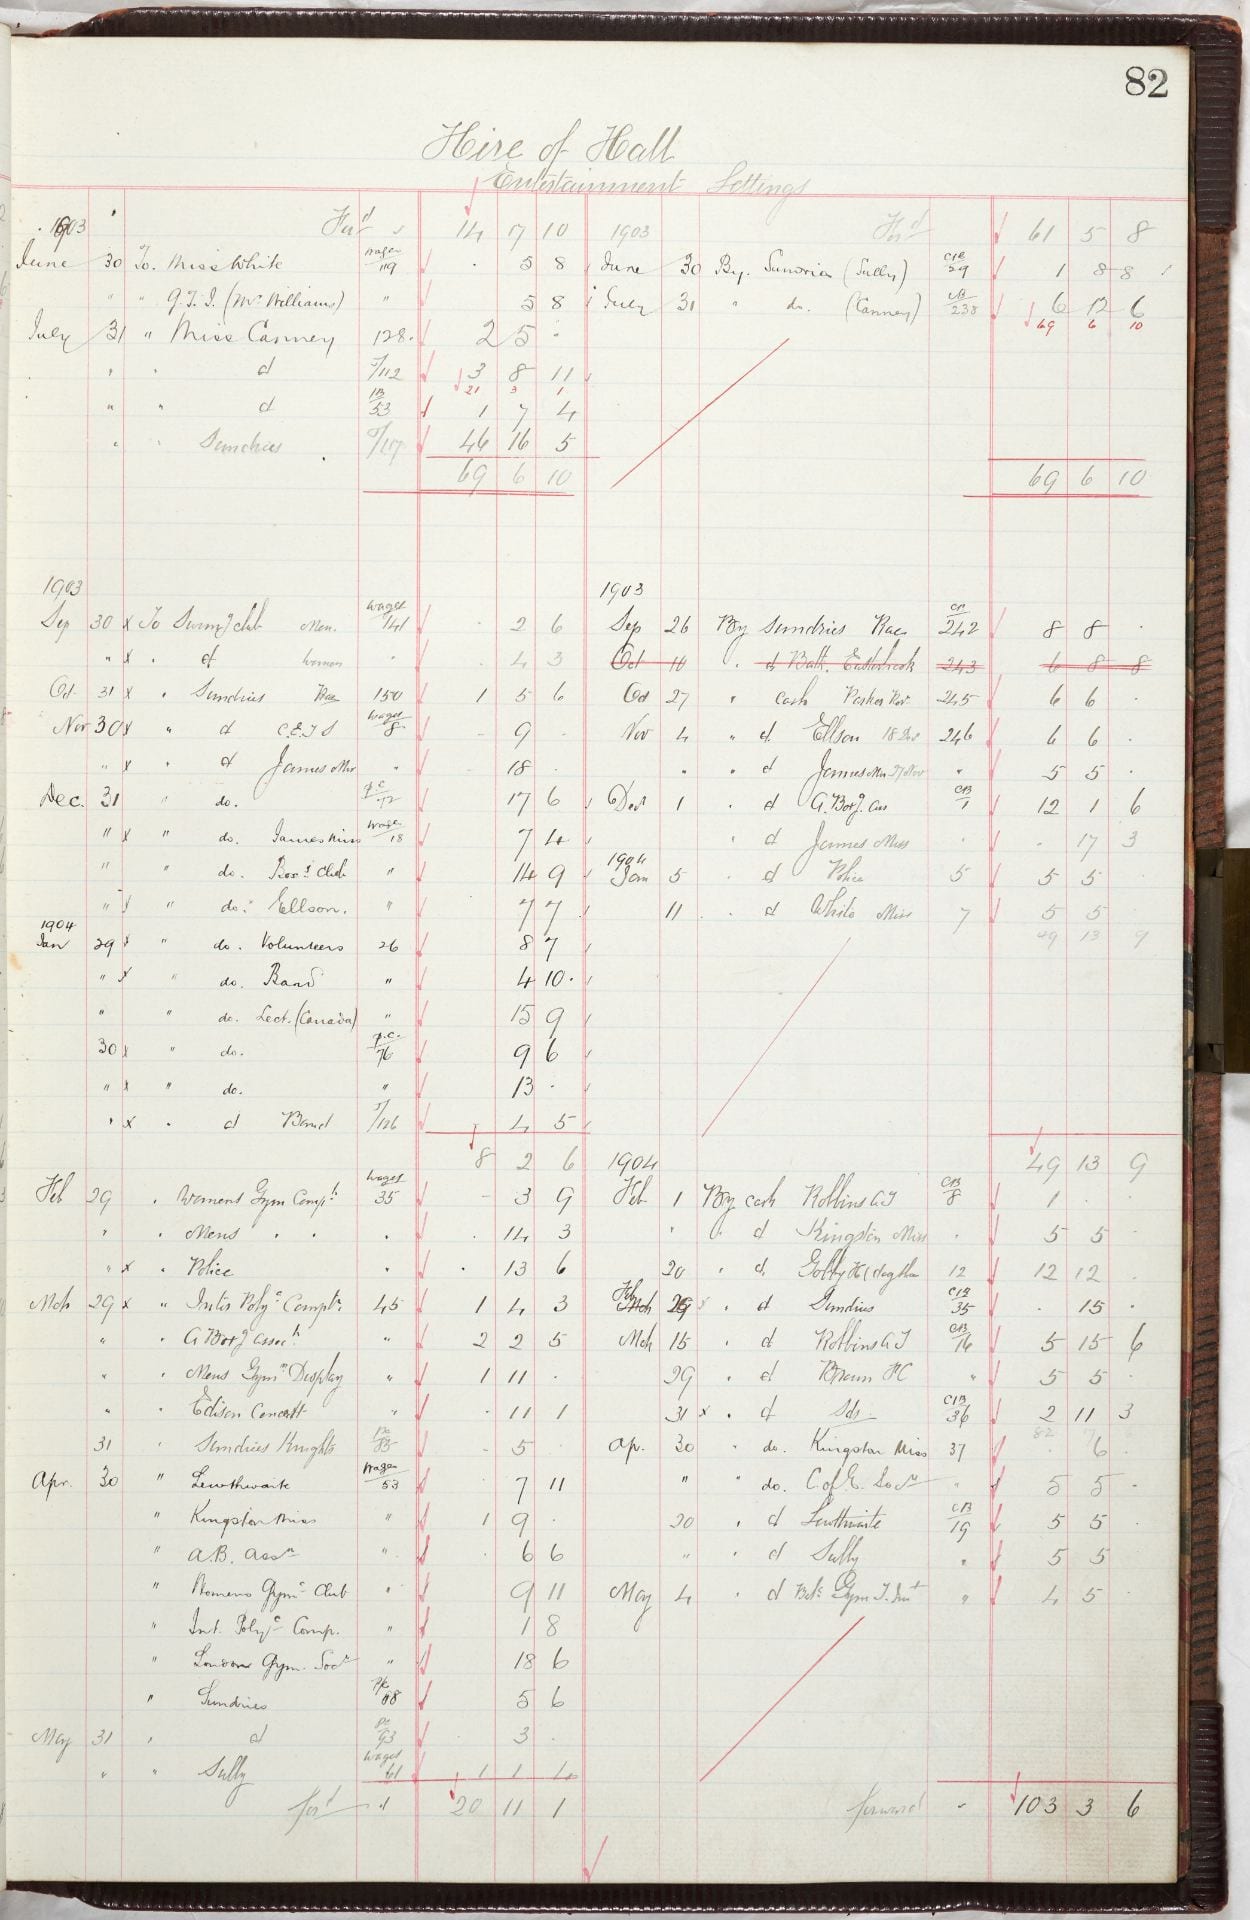 Financial ledger page 82 Hire of Hall - Entertainment Settings. Costs arising from 1903.